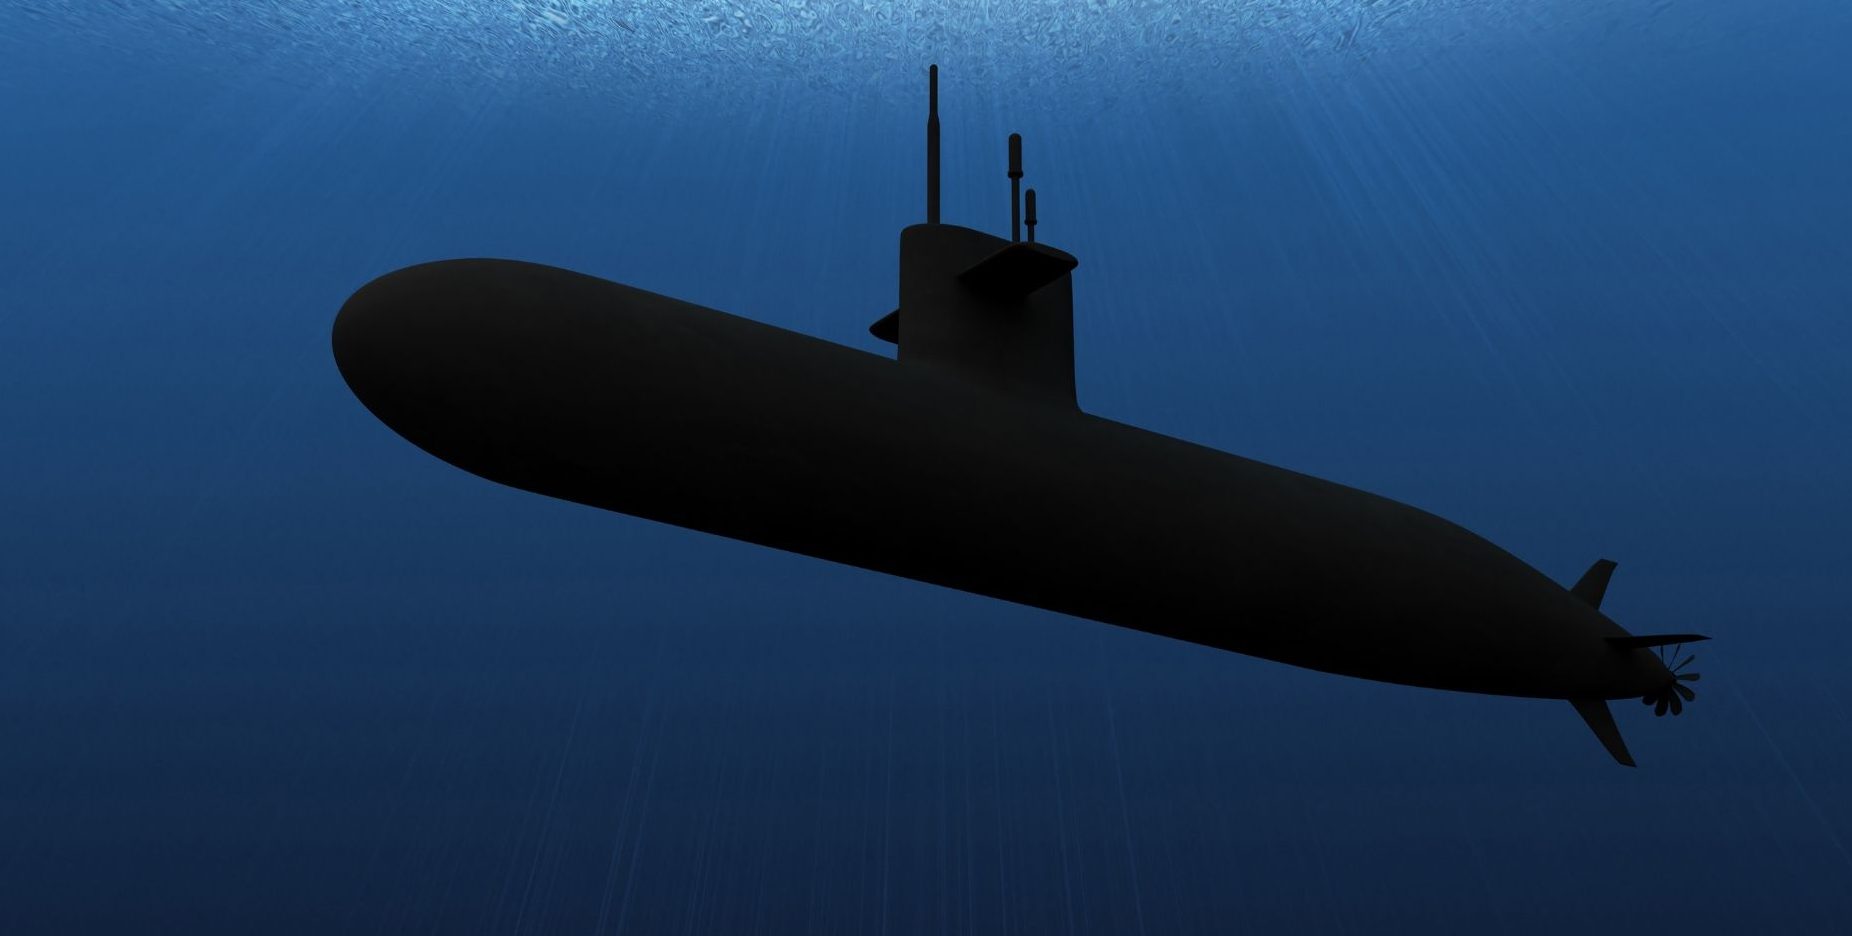 Global Submarines Market Outlook, Opportunities And Strategies